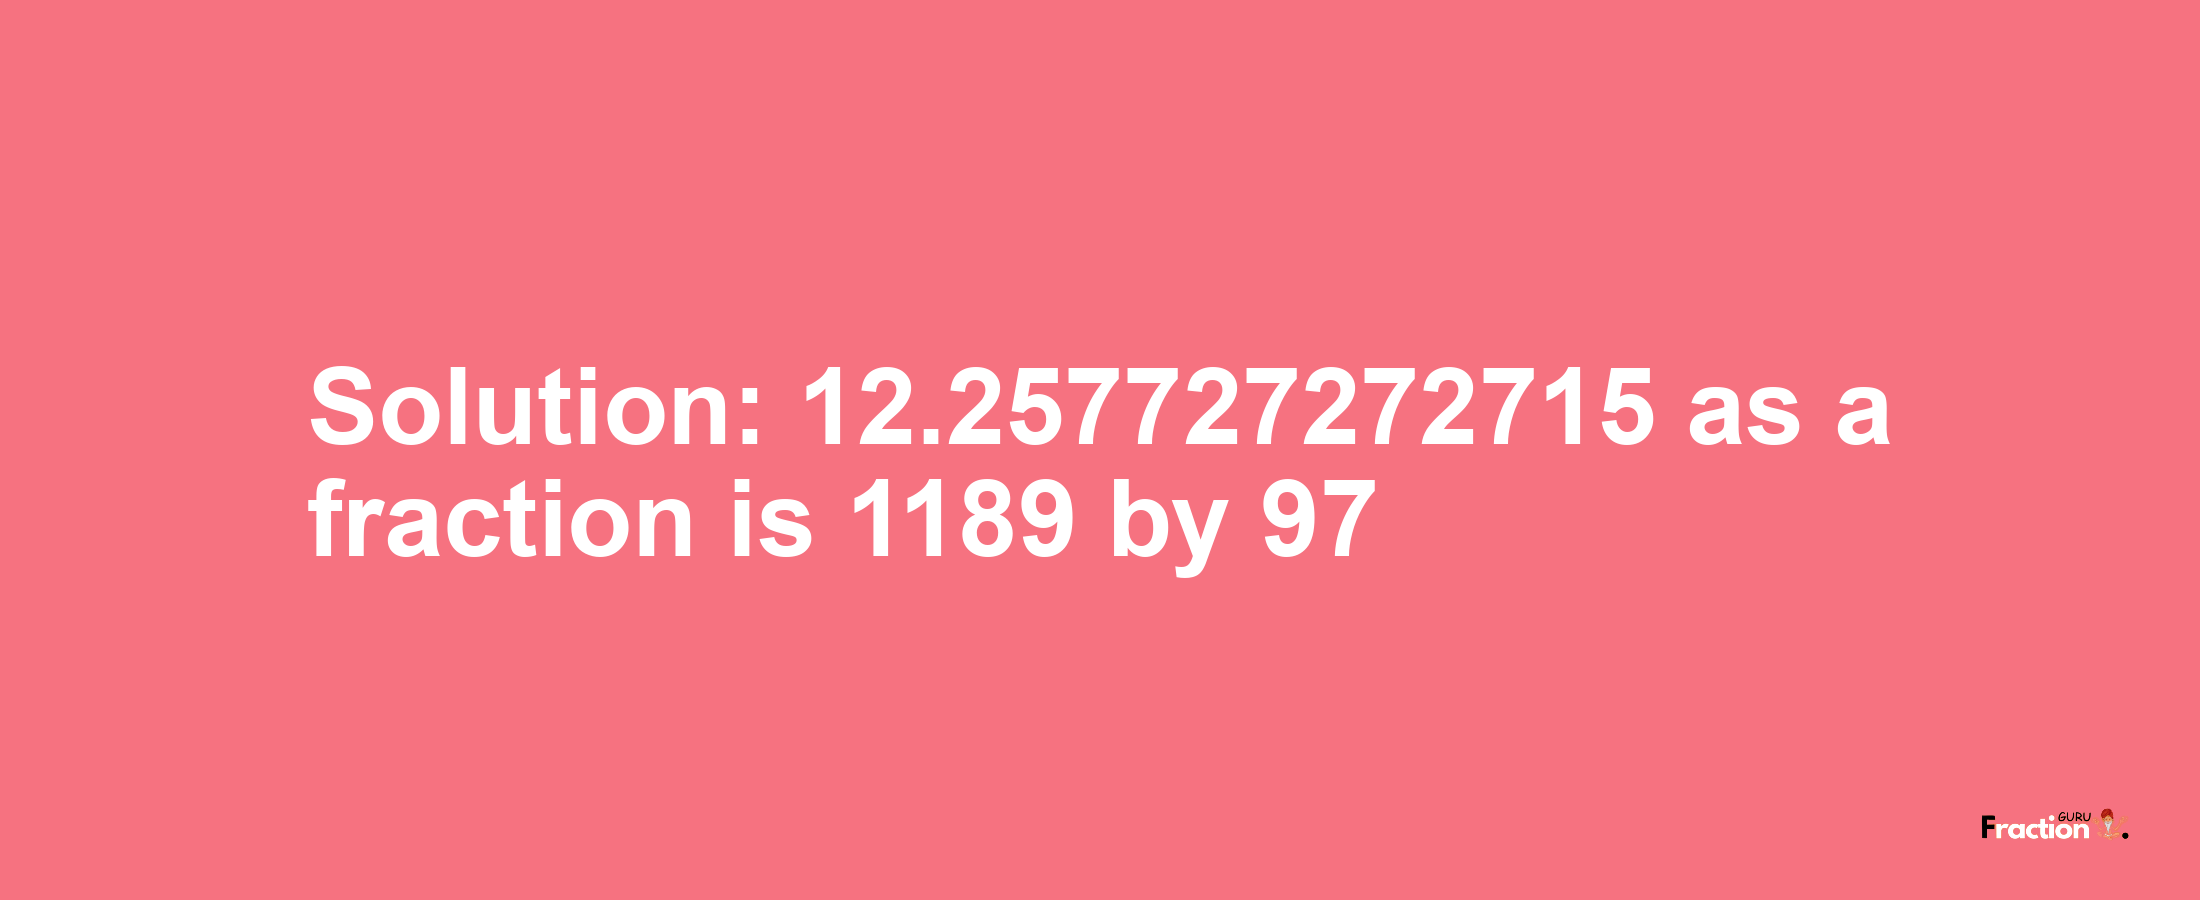 Solution:12.257727272715 as a fraction is 1189/97